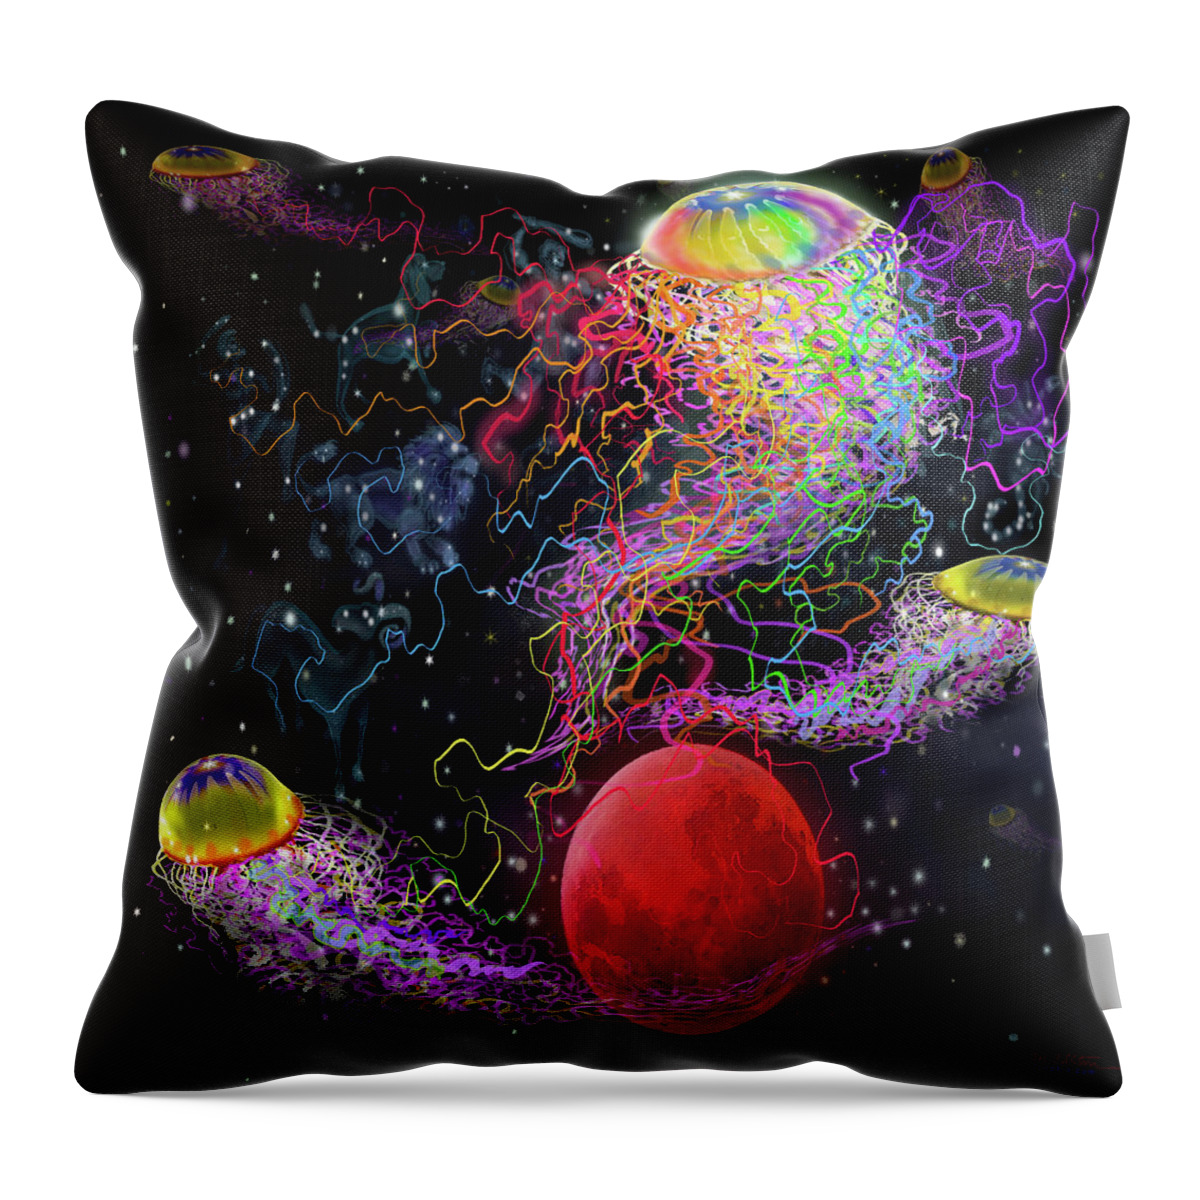 Space Throw Pillow featuring the digital art Cosmic Connections by Kevin Middleton